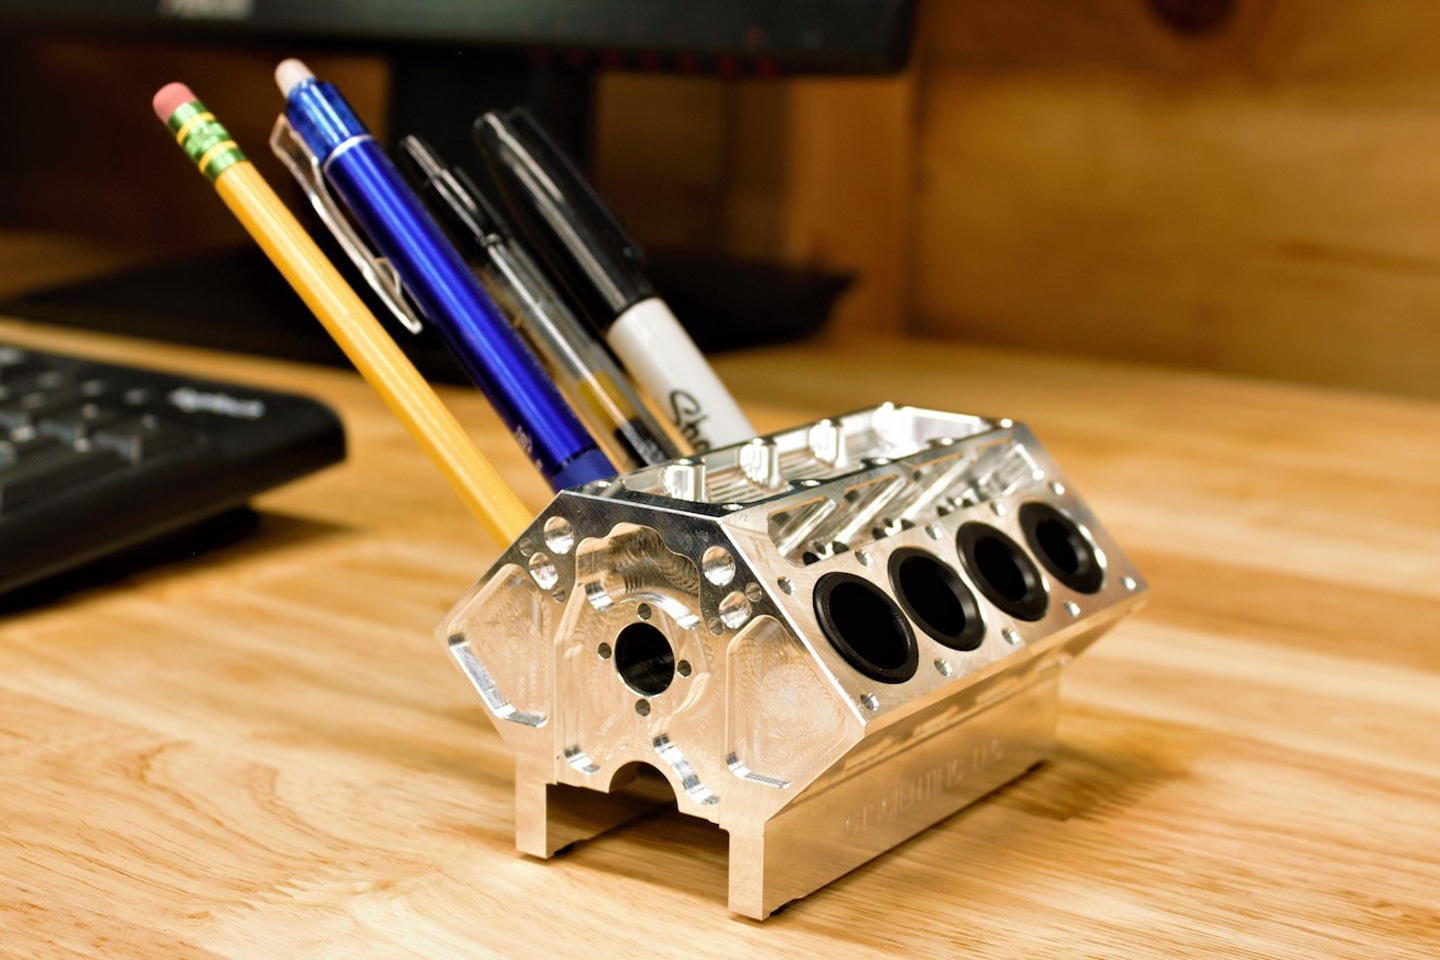 This miniature V8 Engine Block Pen Holder is the ultimate tabletop